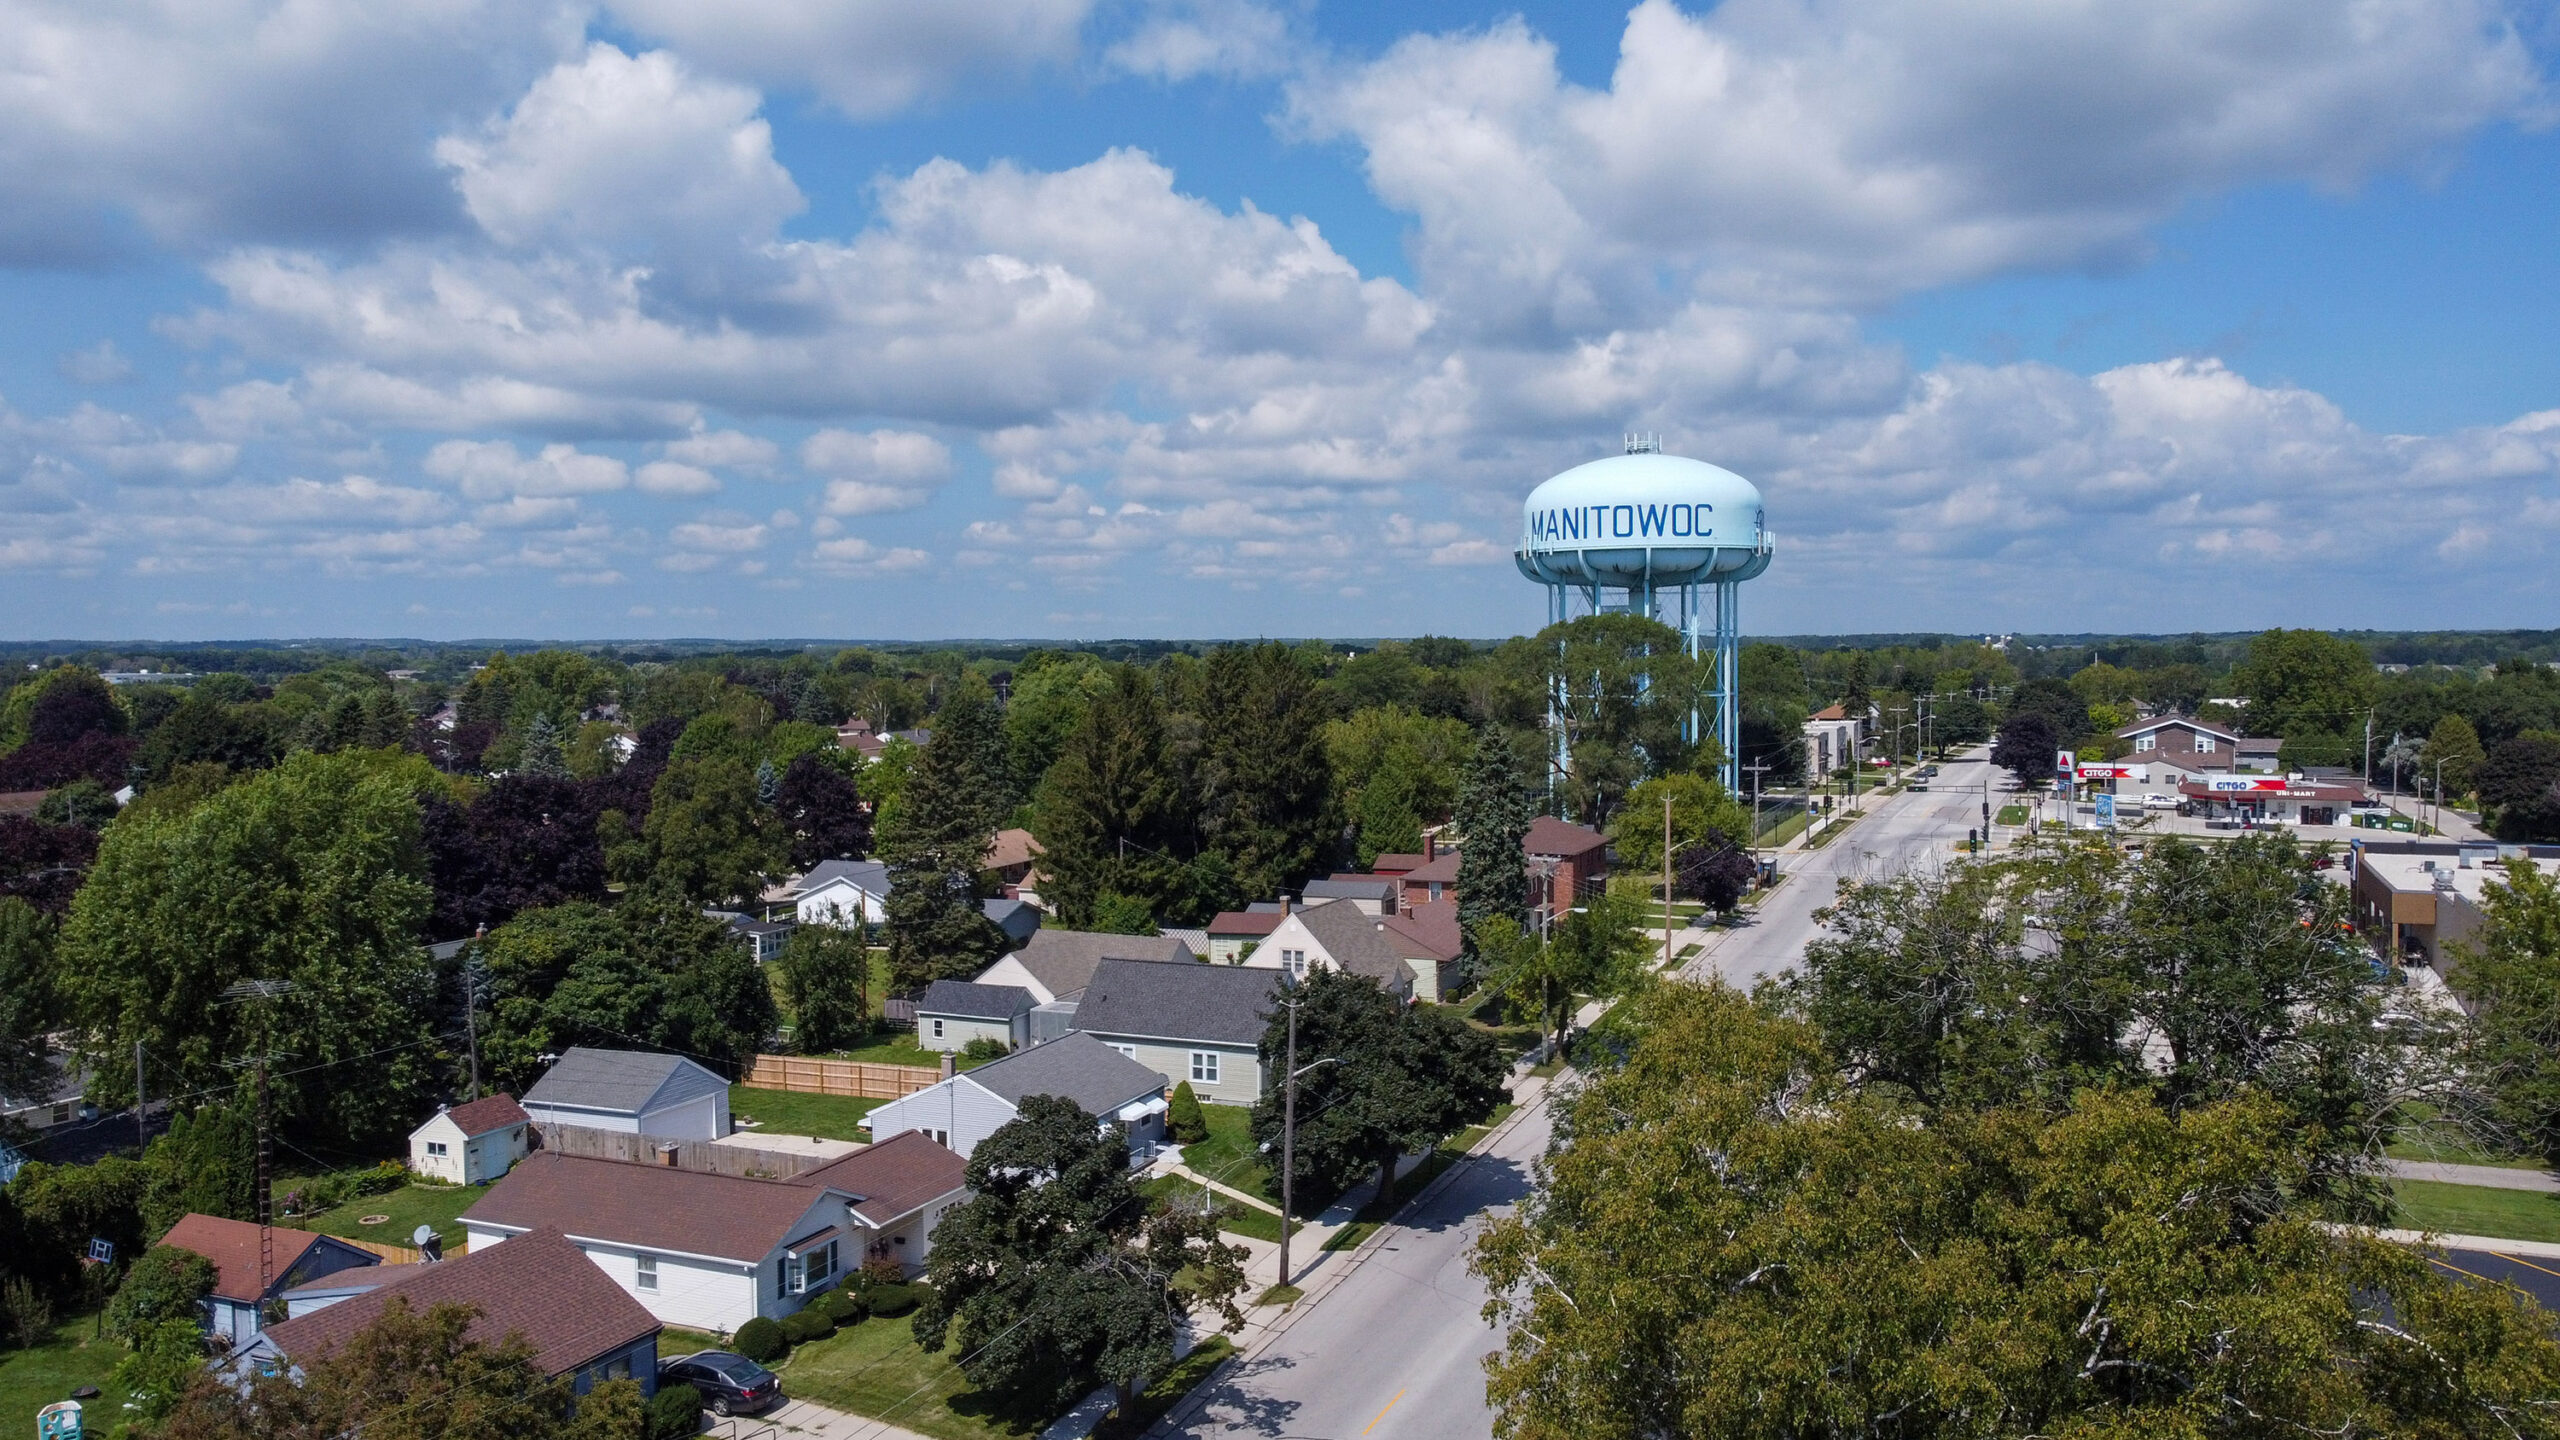 Landscape view of the Manitowoc water tower and the residential street that runs by it